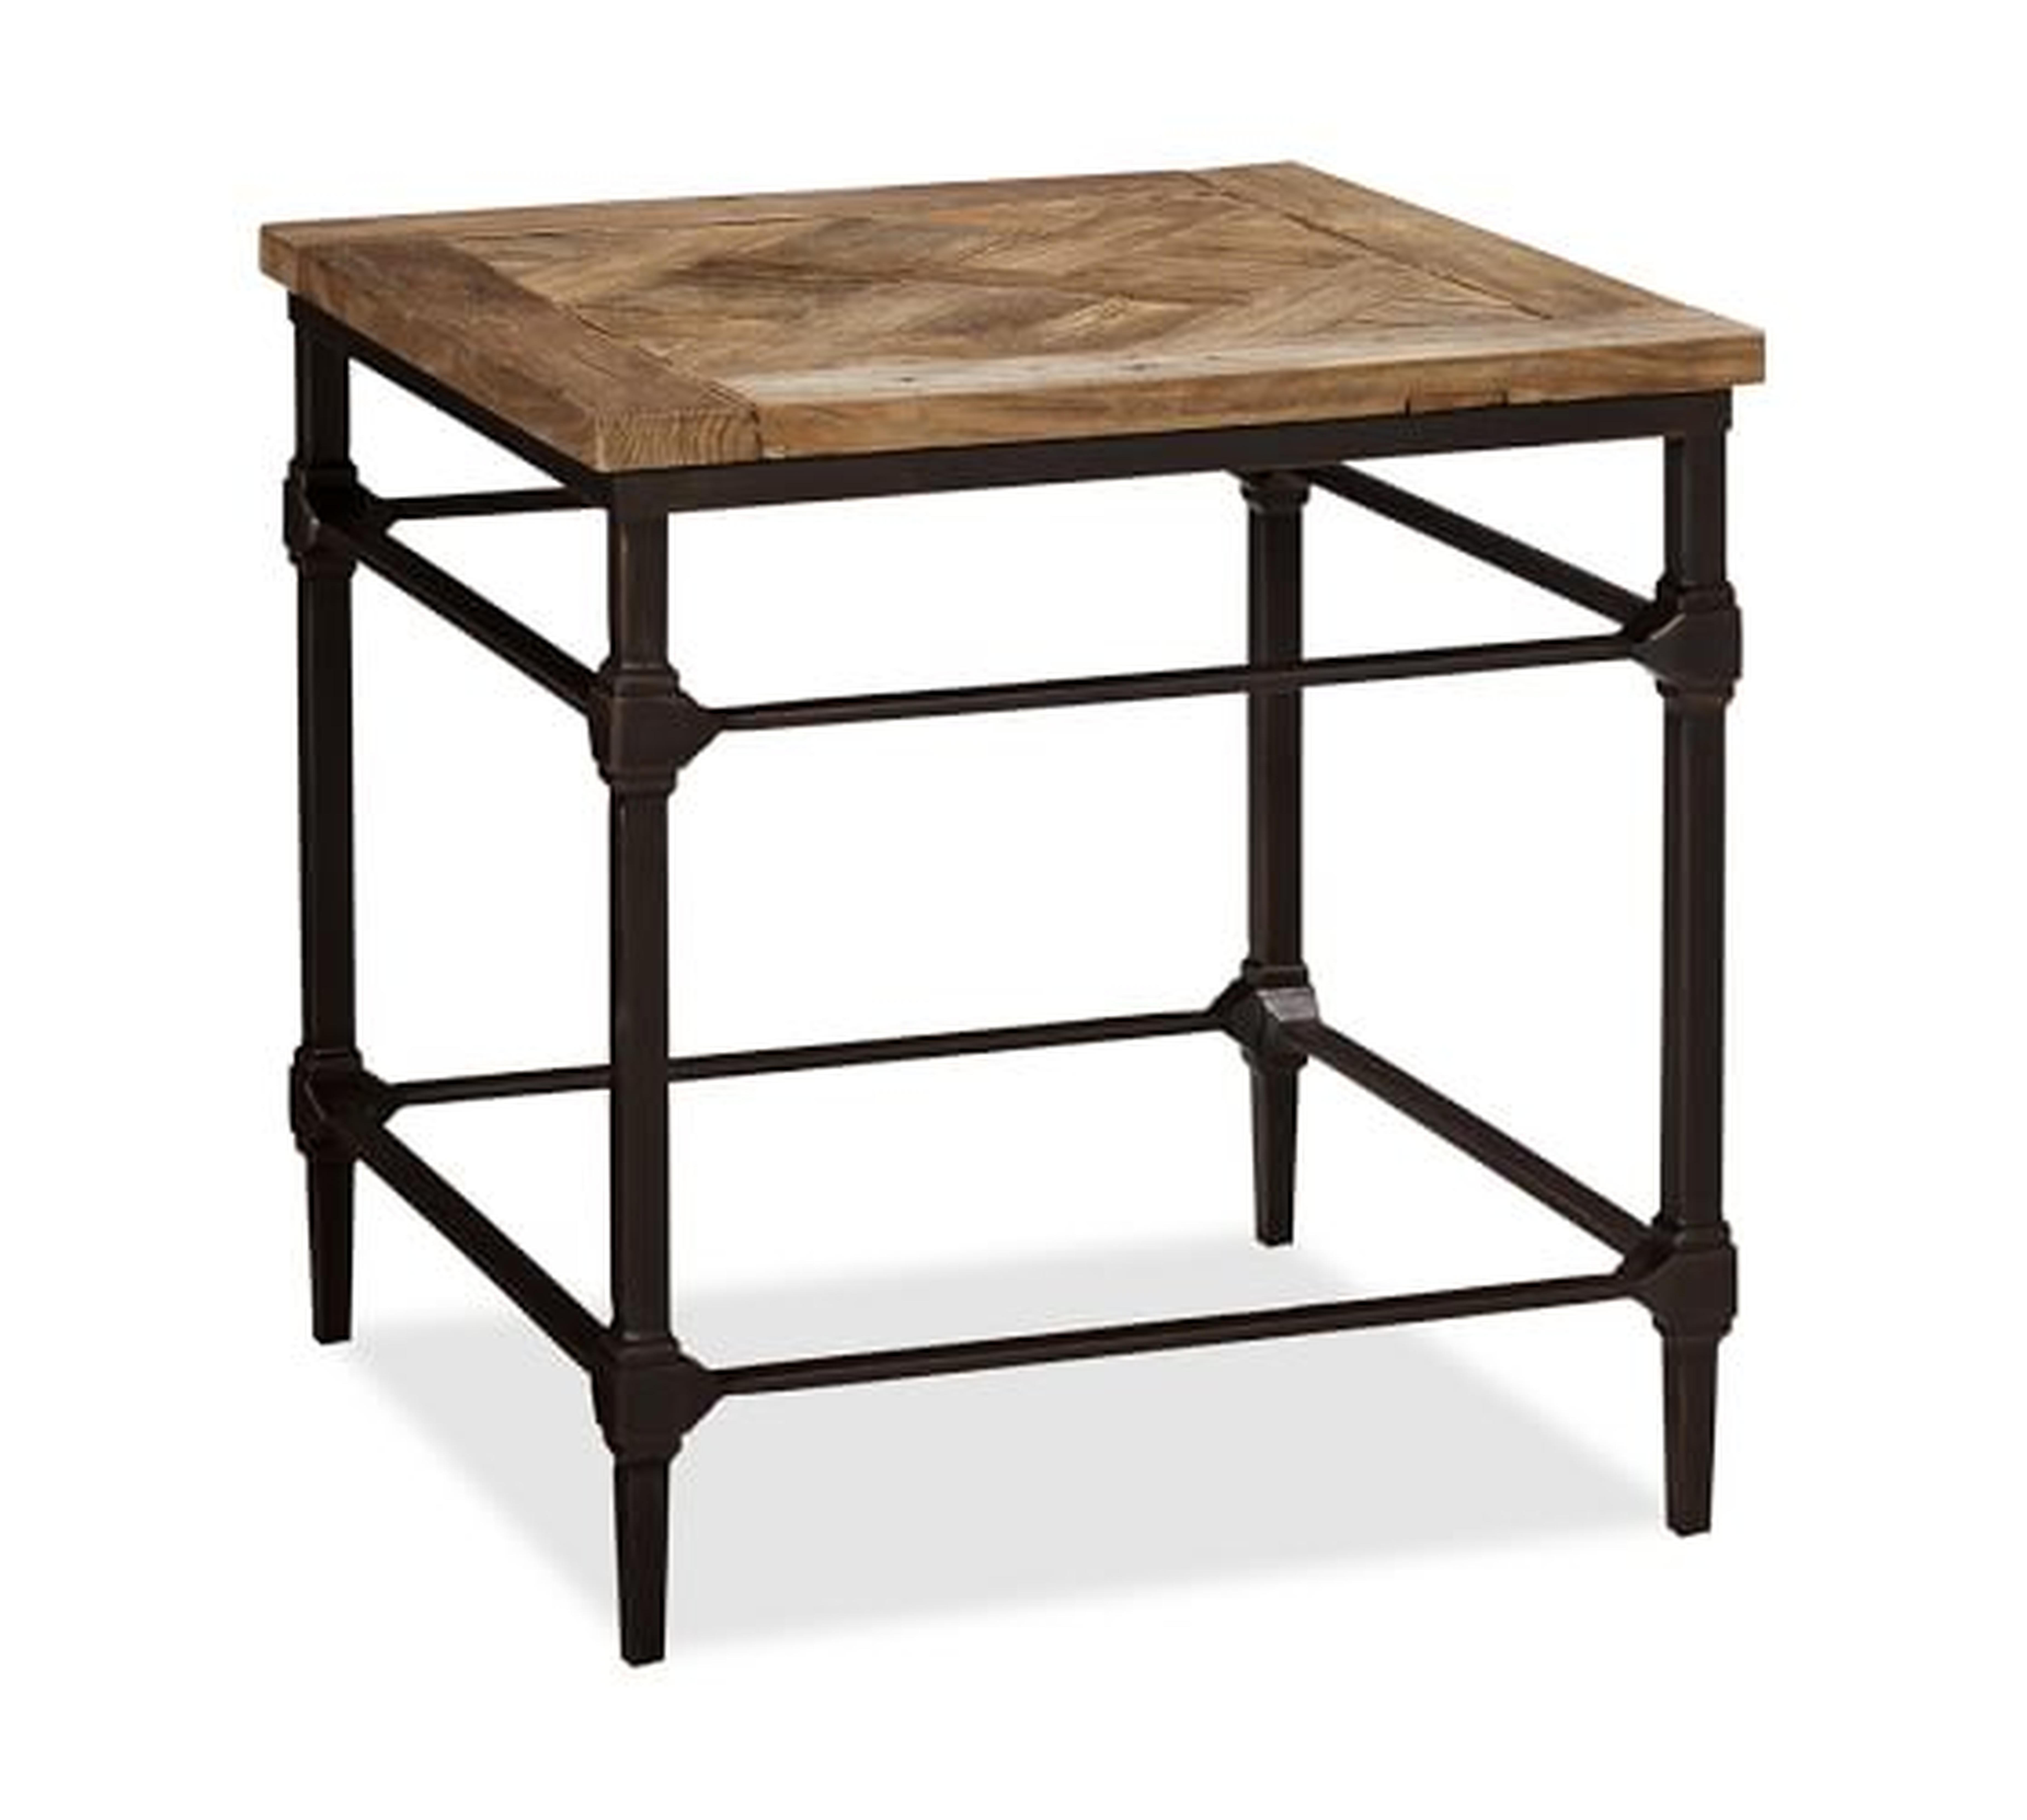 PARQUET RECLAIMED WOOD & METAL SIDE TABLE - Pottery Barn